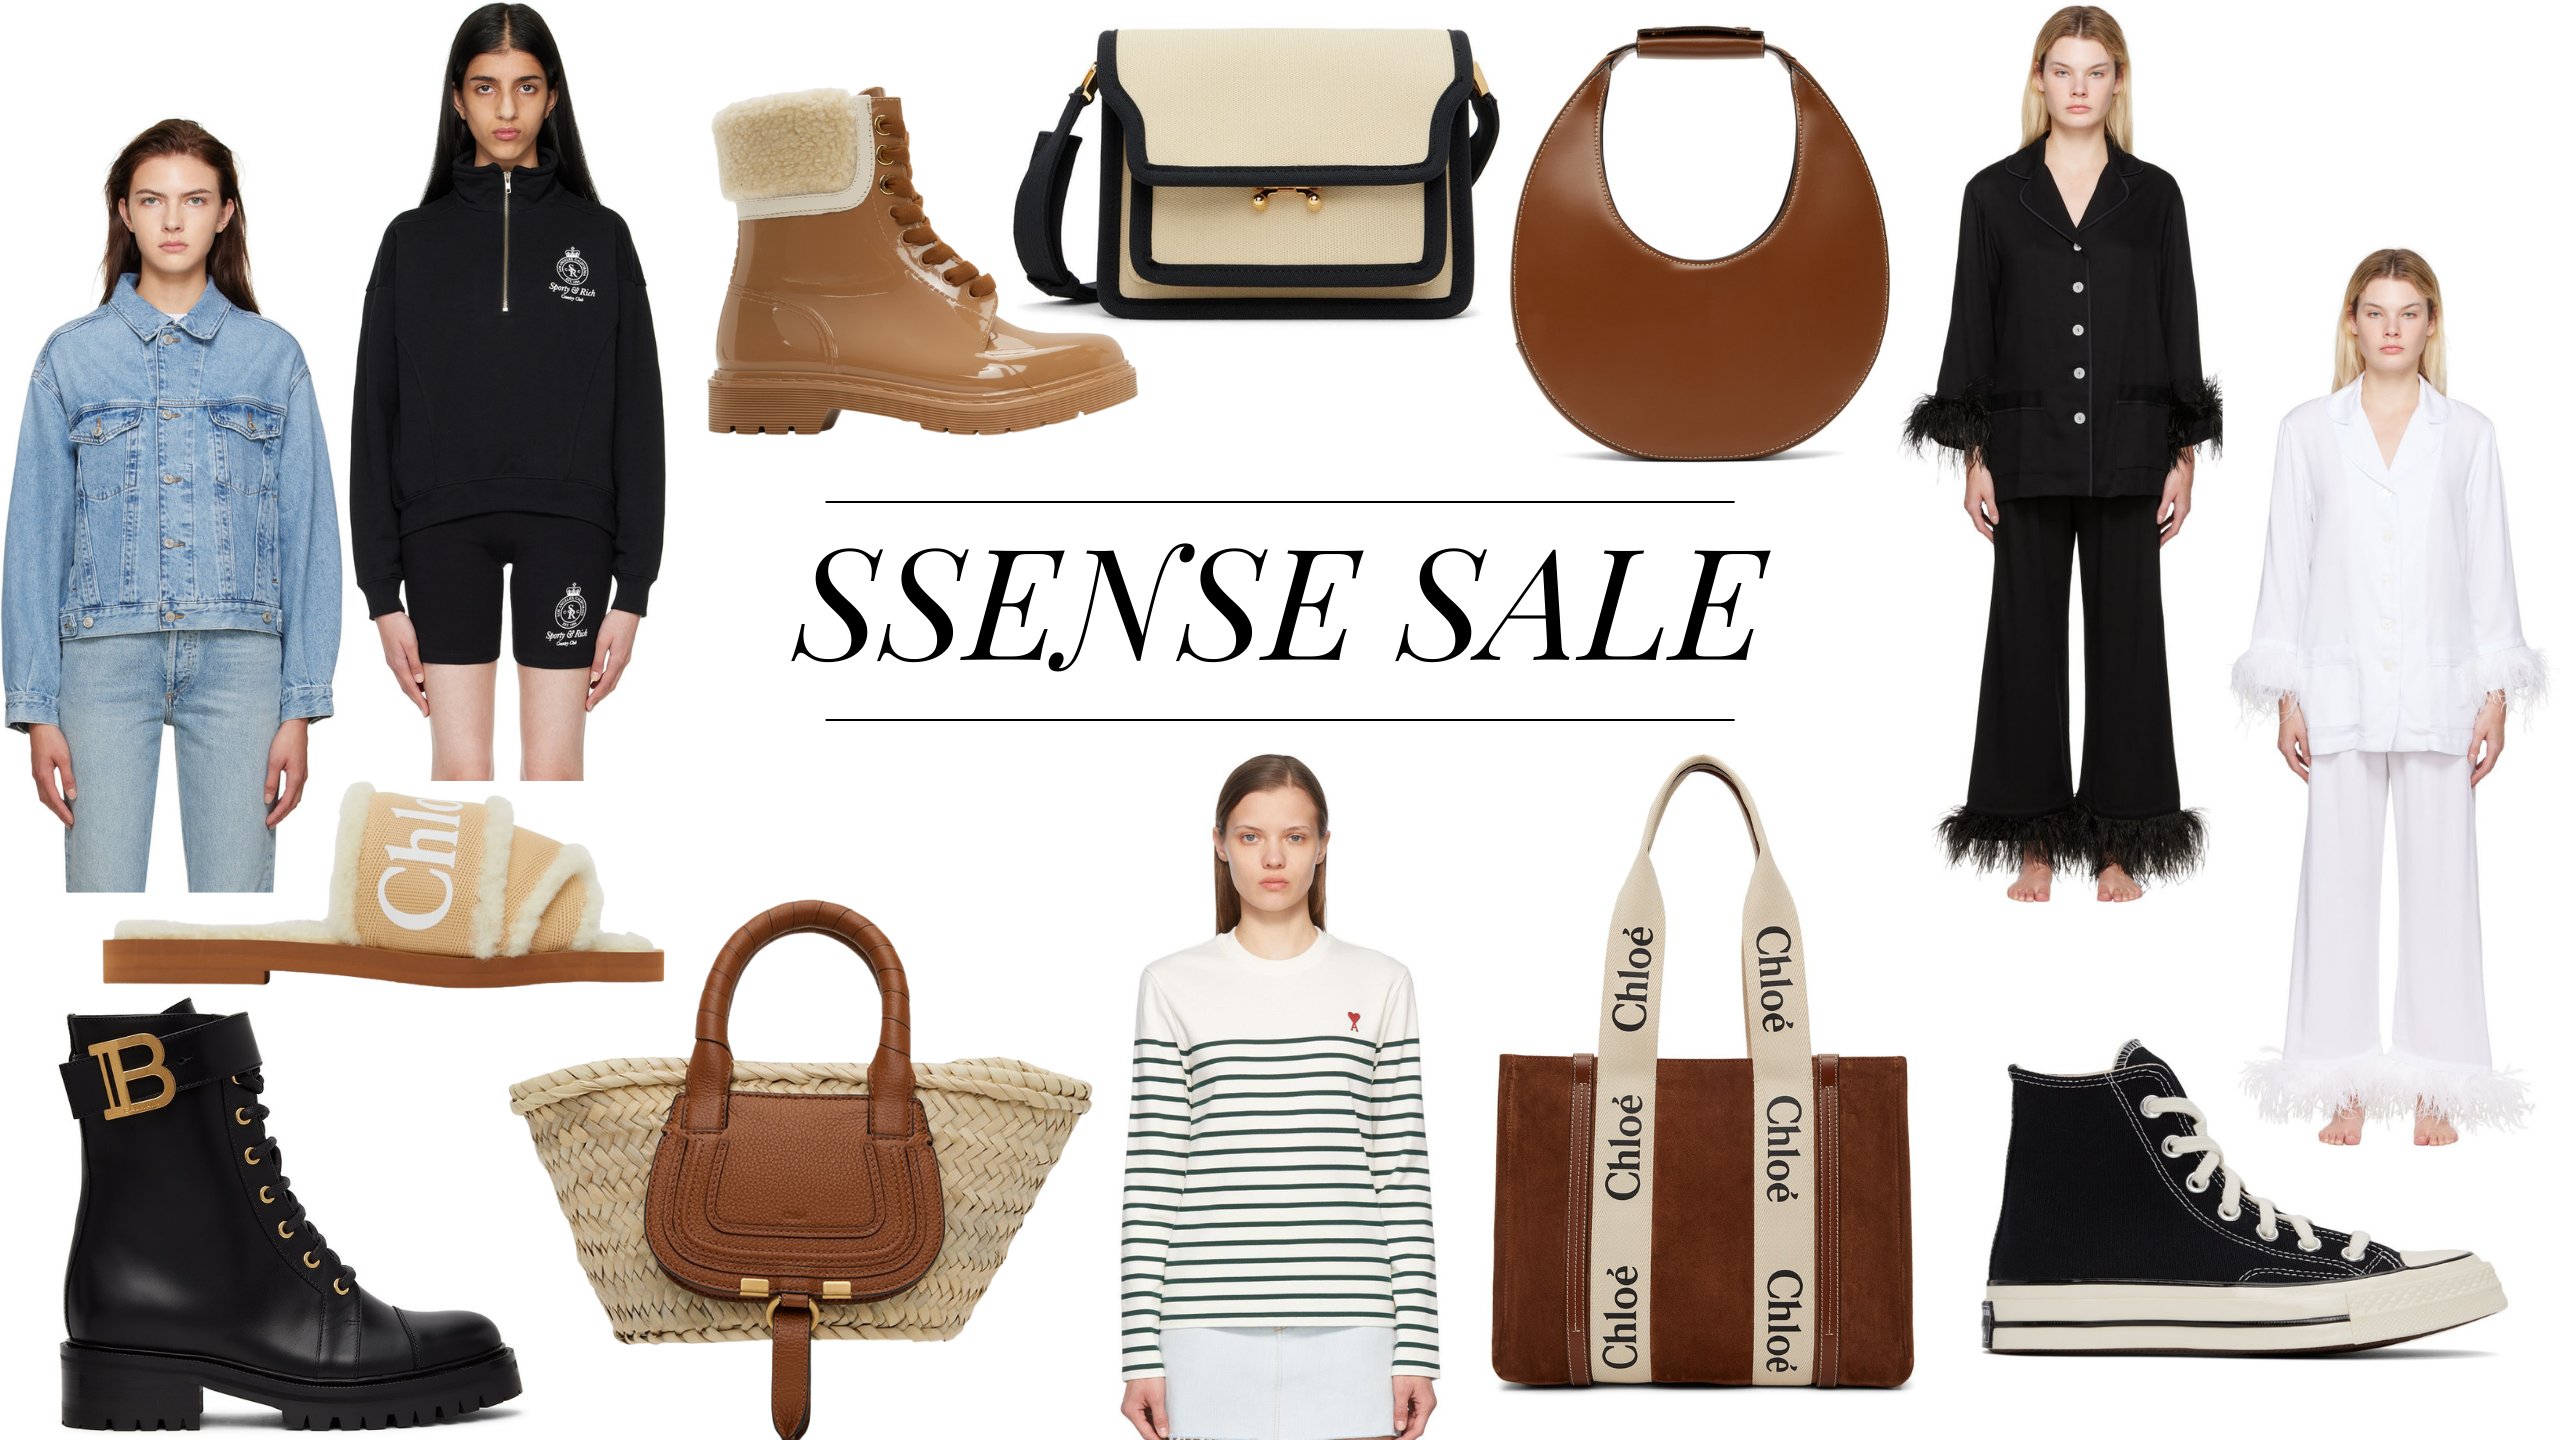 Our Top Picks From the SSENSE Sale